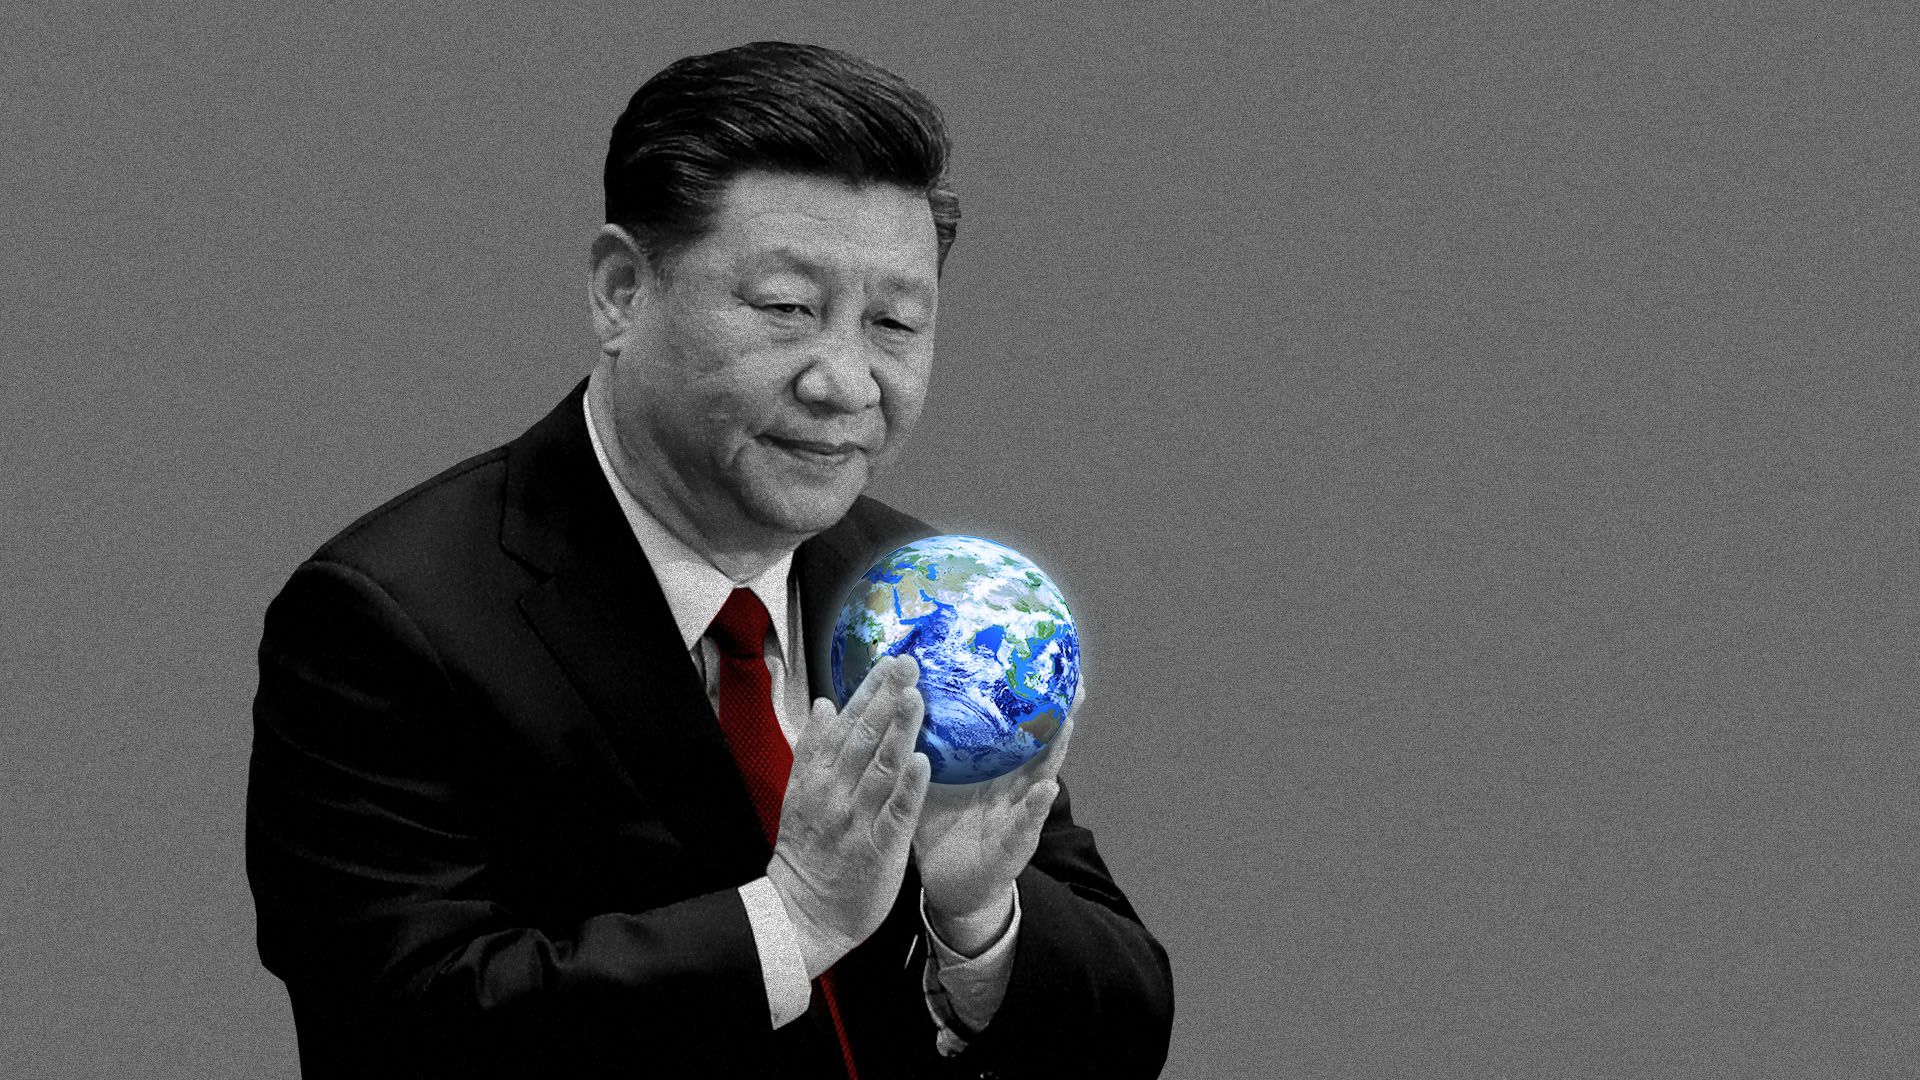 Illustration of Chinese President Xi Jinping holding a small globe